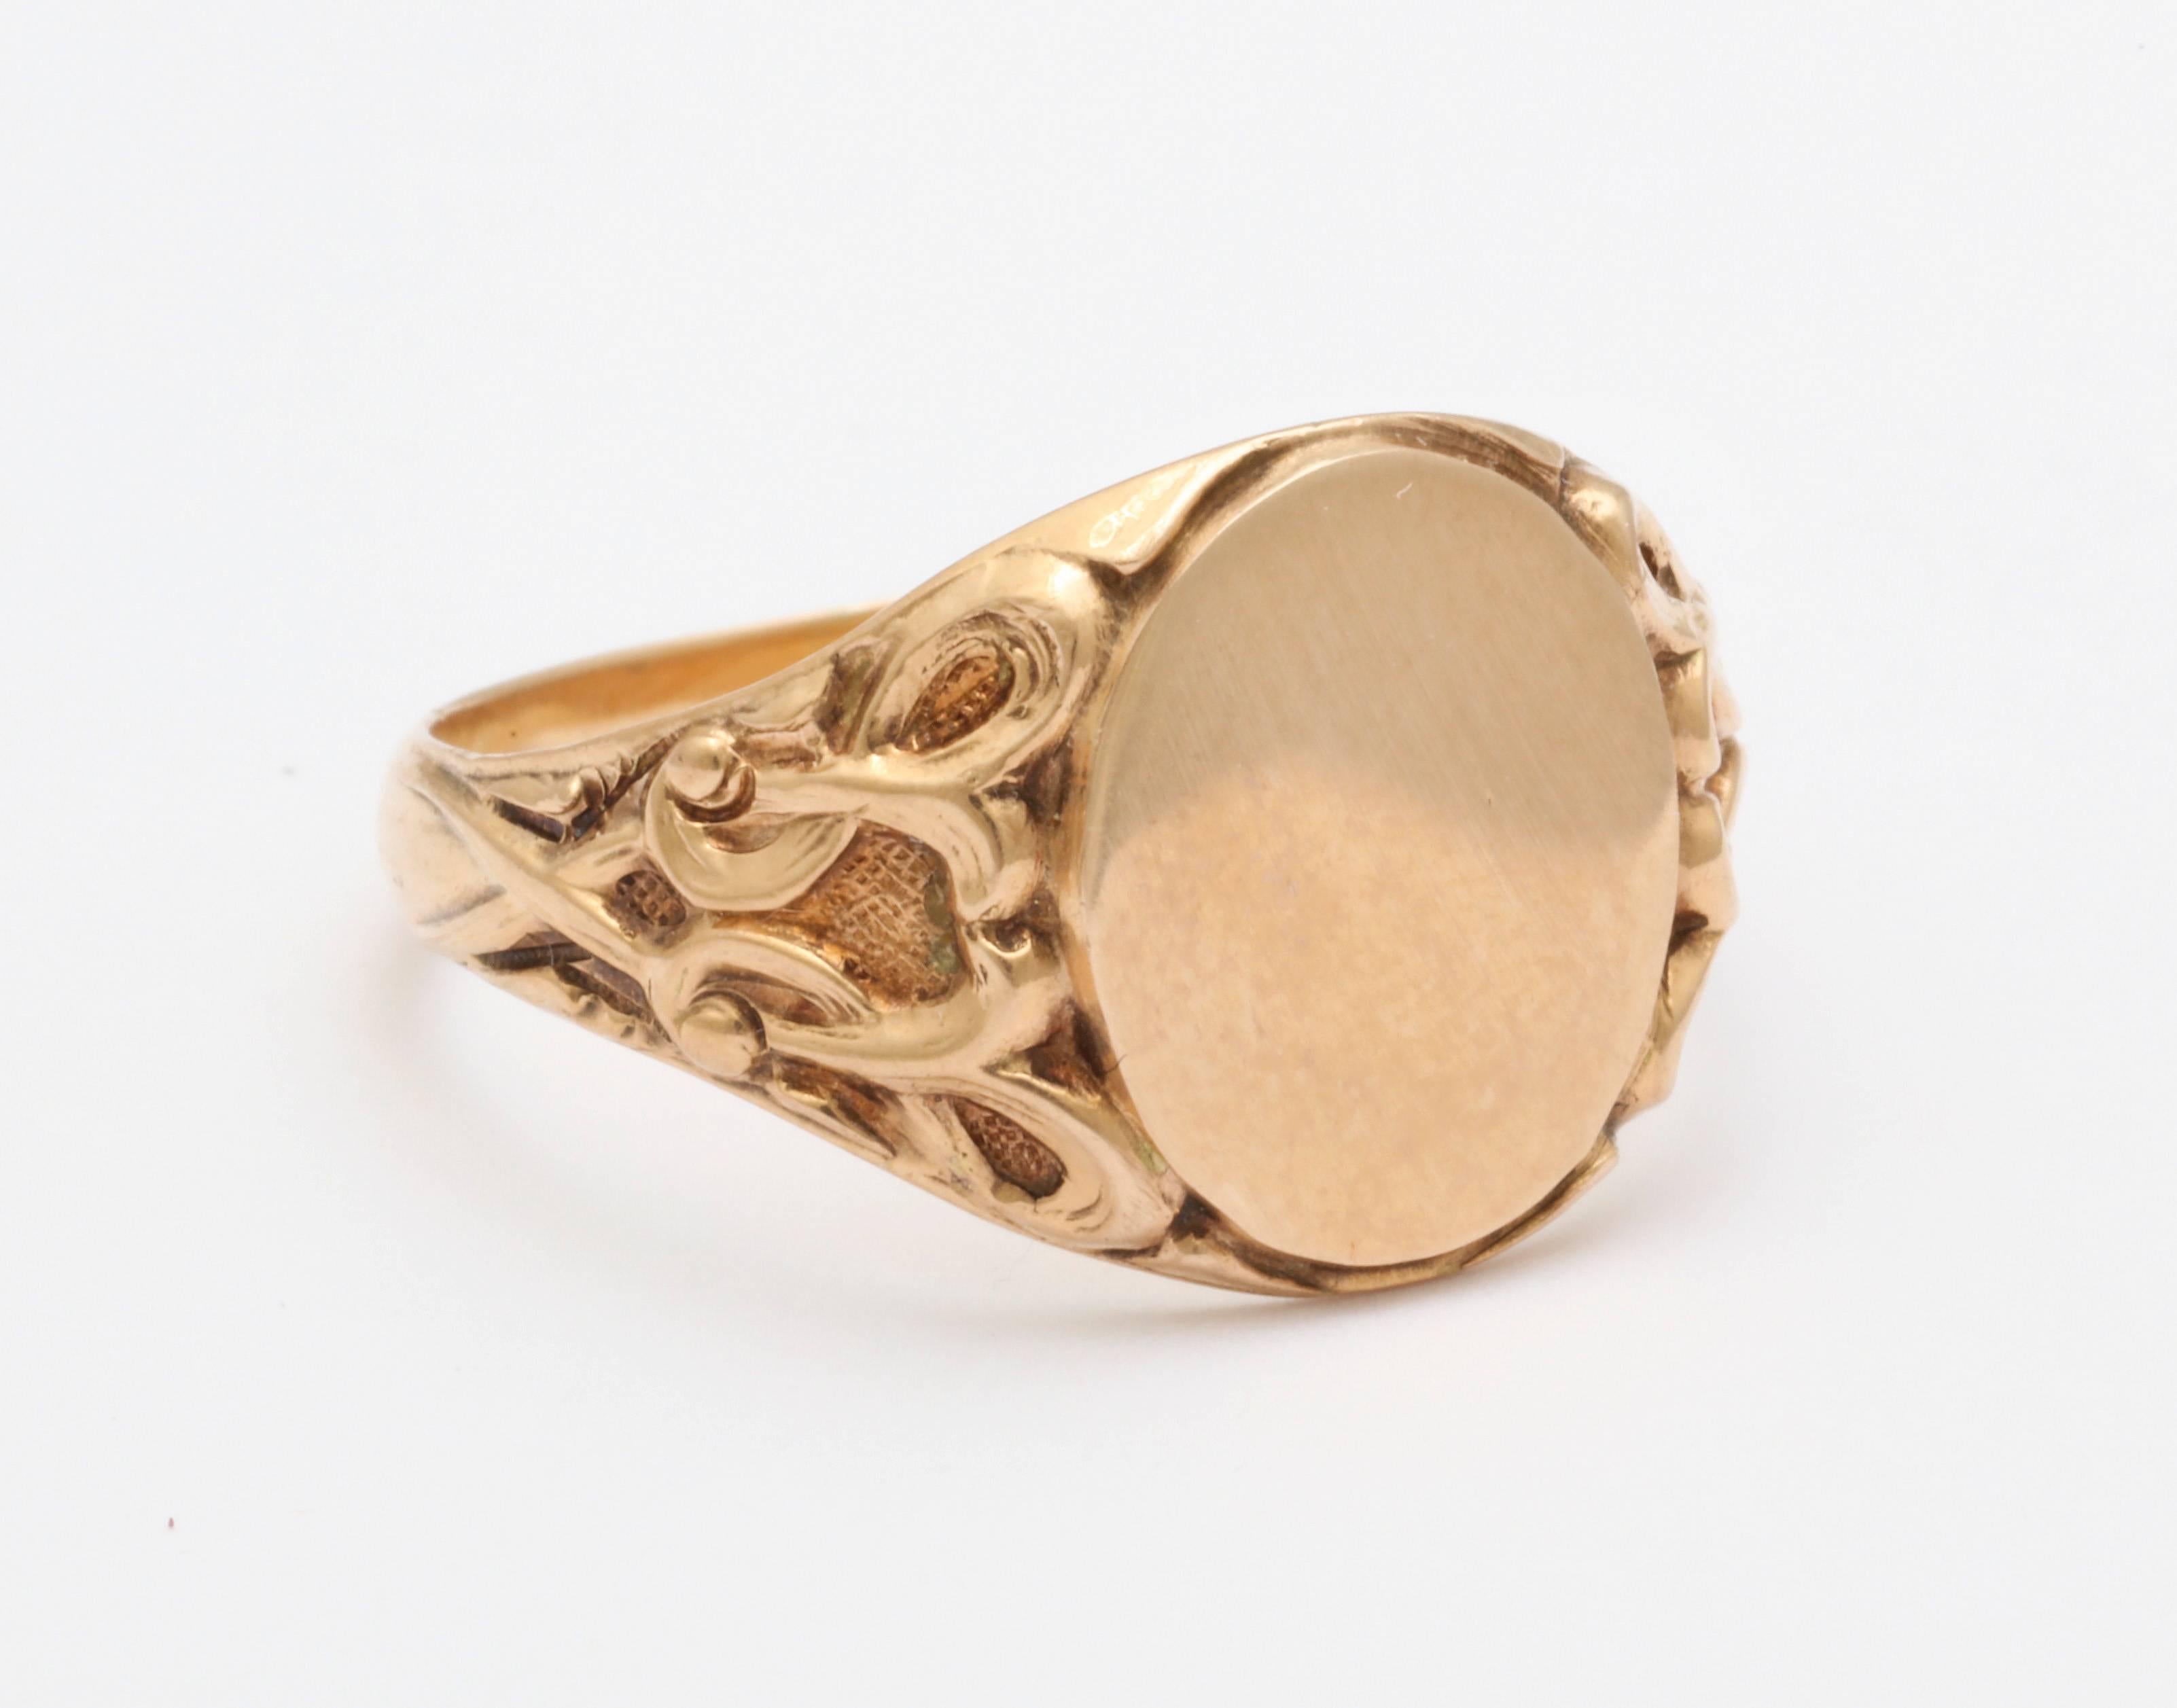 , 
Fine workmanship brings striking contrast to this Alsop Brothers signet ring of engraved eternity knots on the shank joined to a plain front that allows you to be the creator of your own message. Engrave a heart with an arrow, scrolling initials